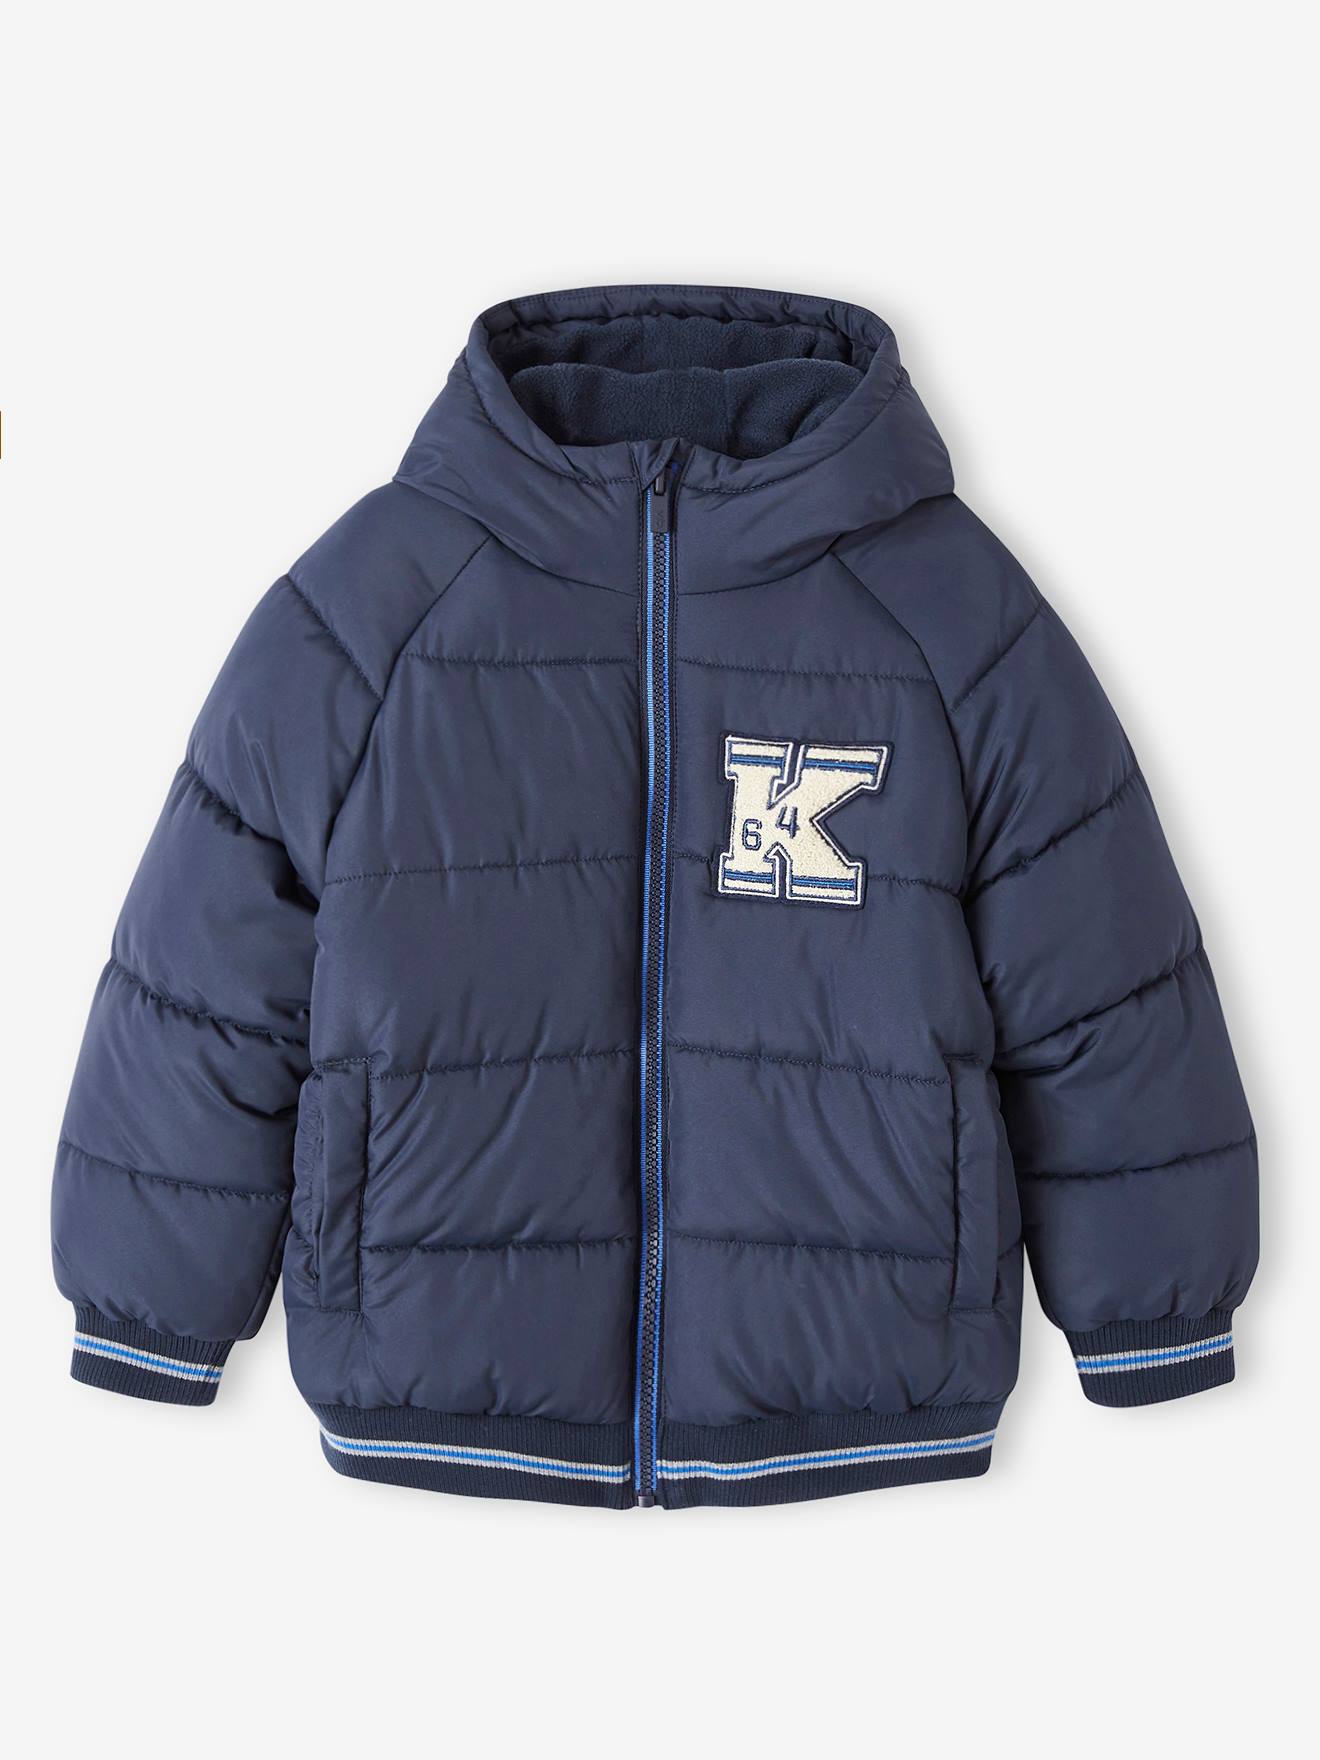 College-Style Padded Jacket with Polar Fleece Lining for Boys navy blue